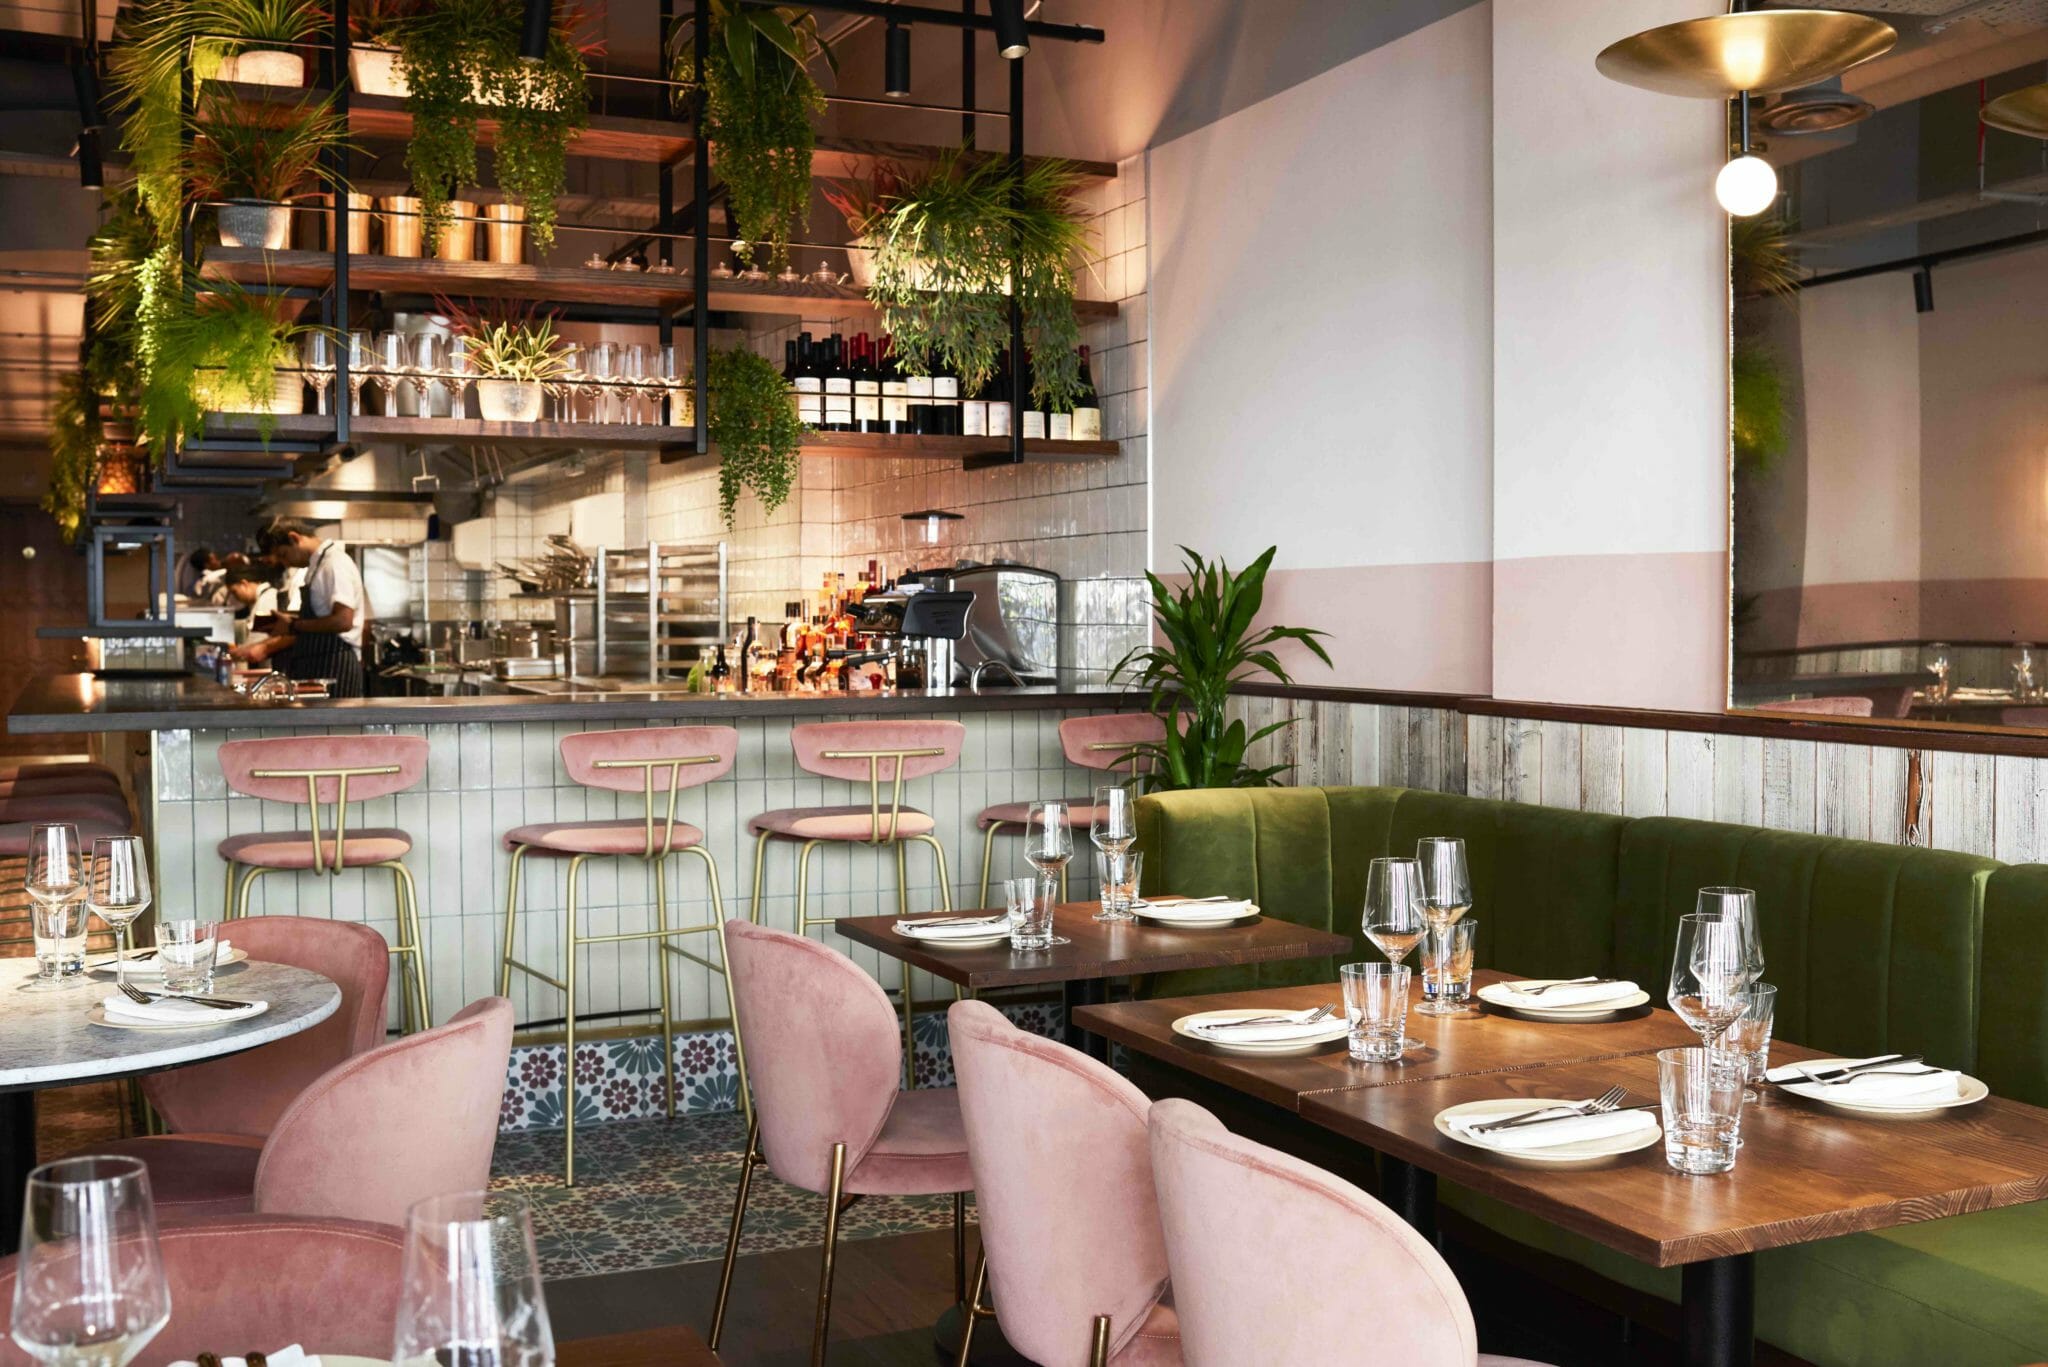 The Best Covent Garden Restaurants | 15 Of Its Finest Eateries